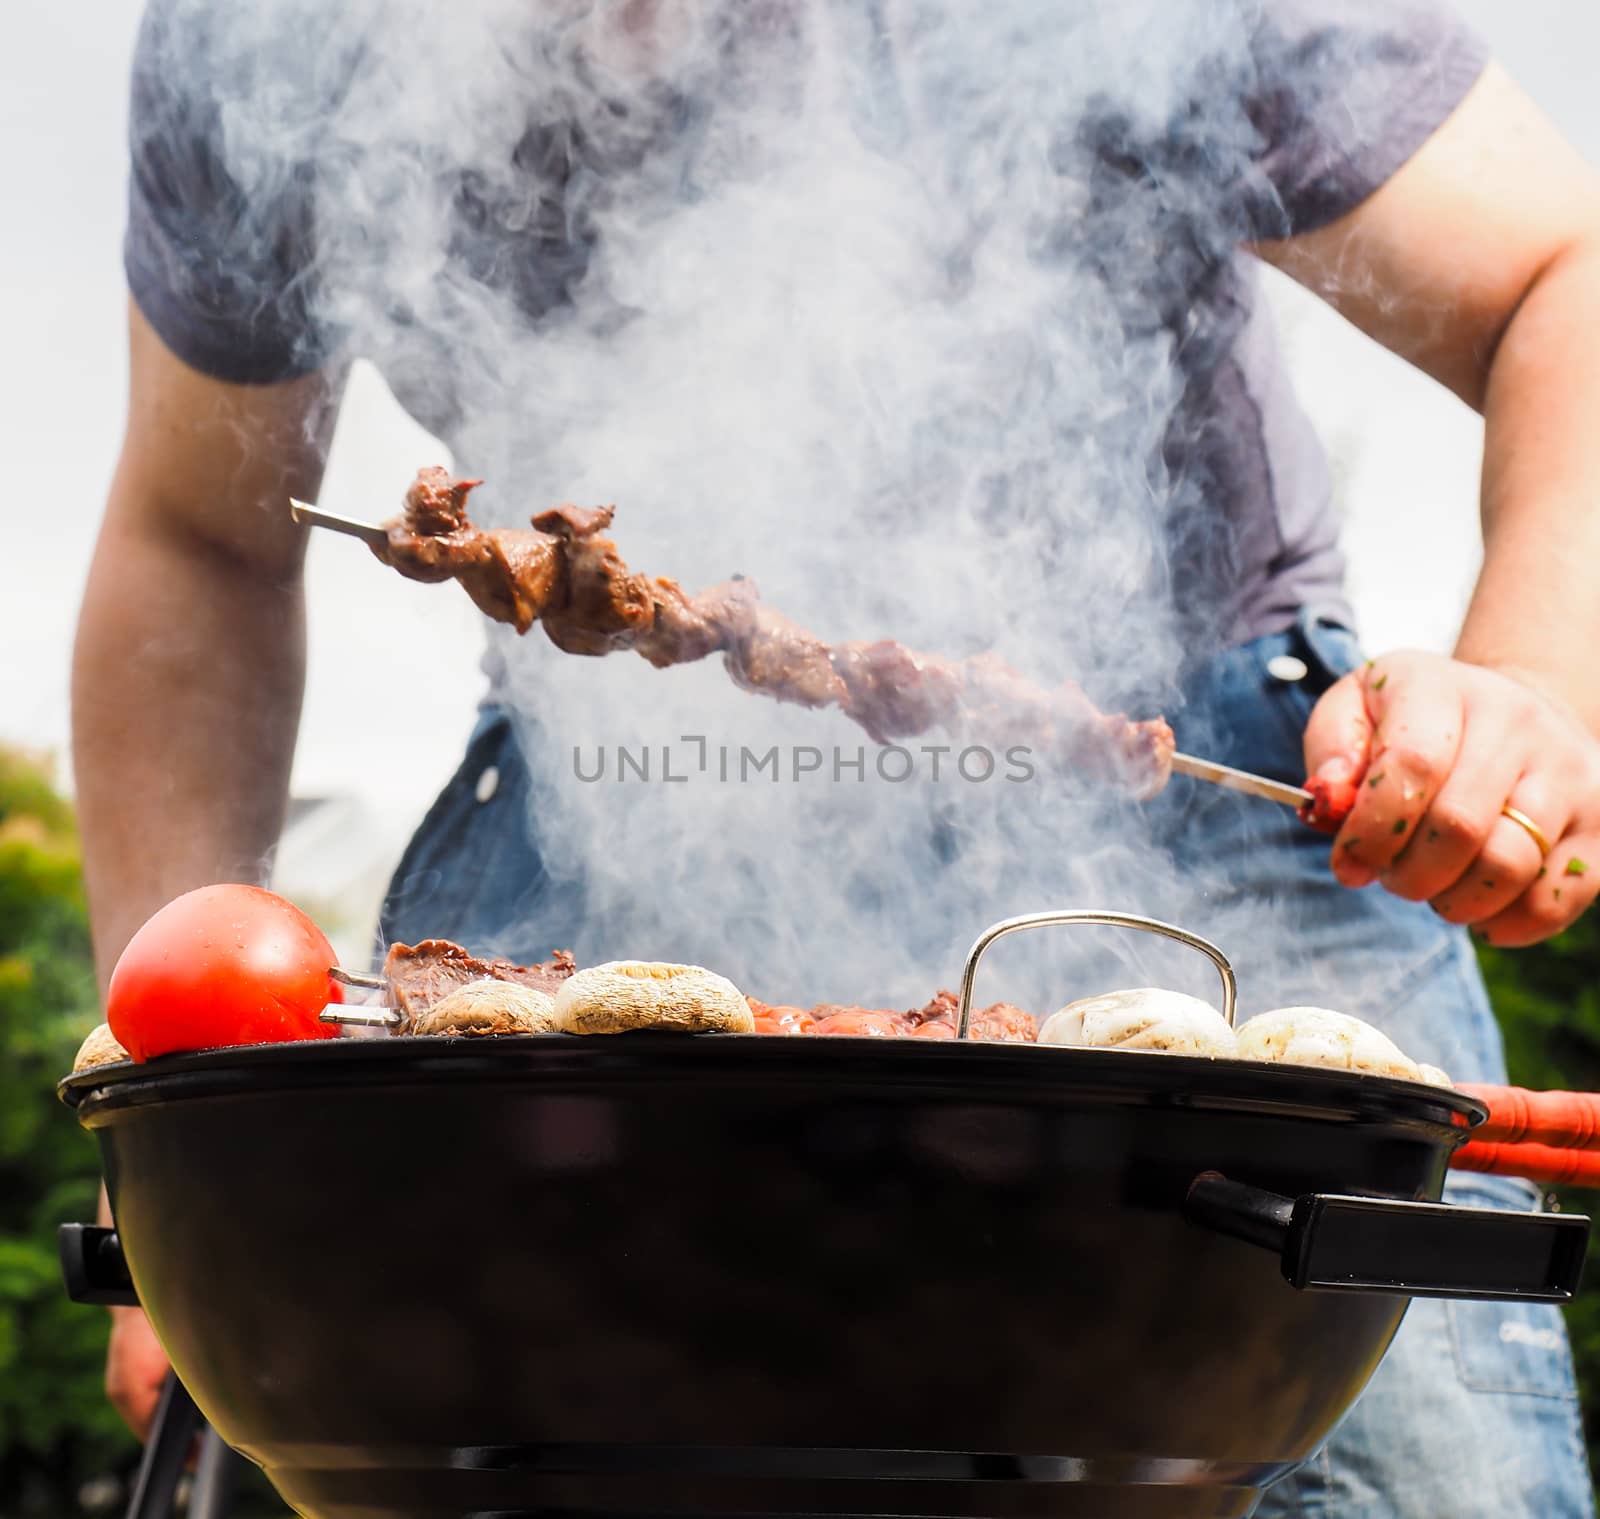 Chef covered in smoke grilling skewers of meat and vegetables over charcoal barbecue